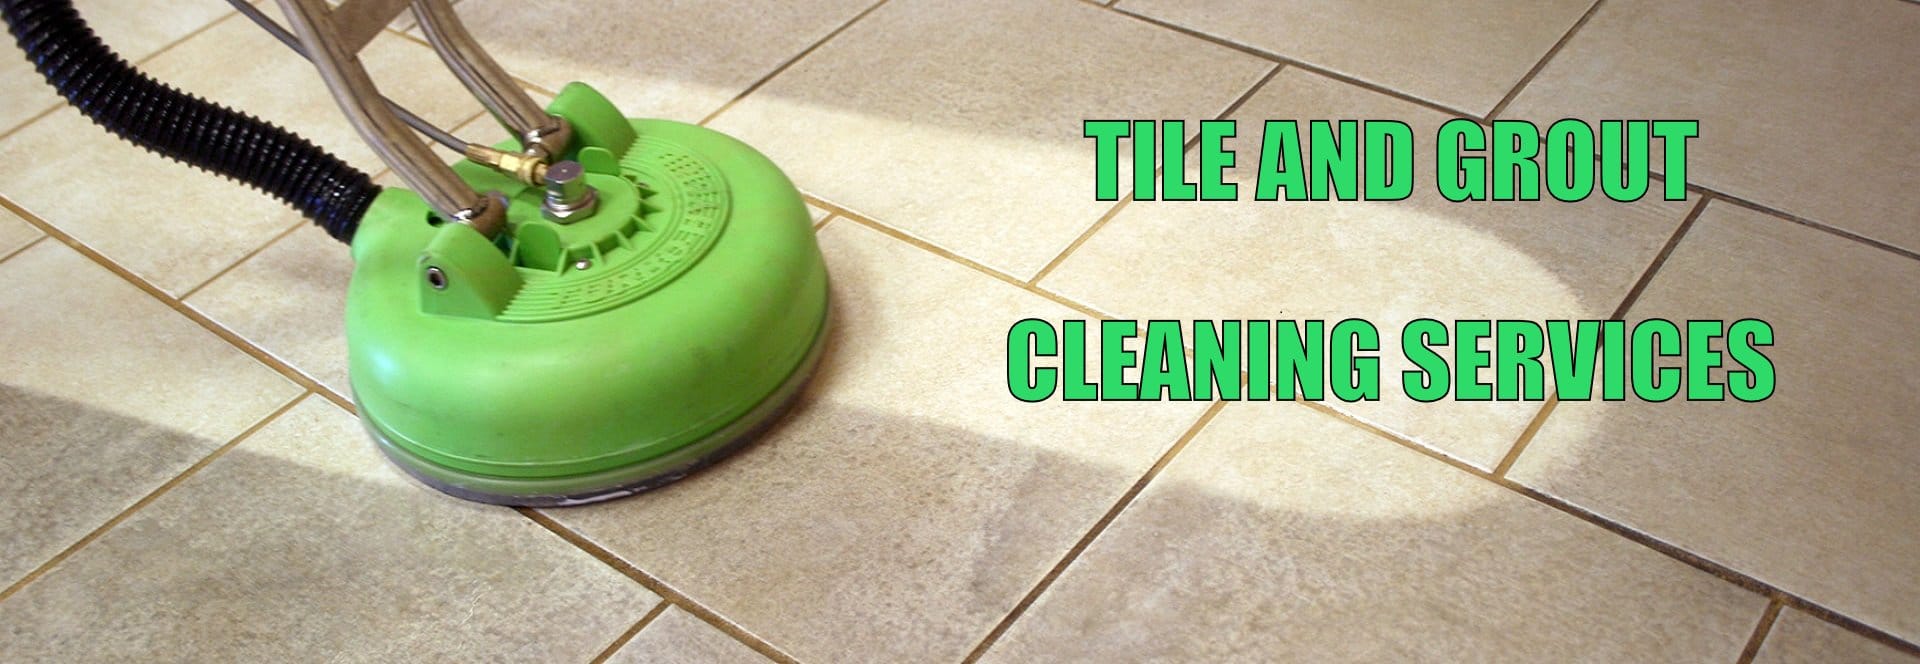 Tile and grout Cleaning Ottawa